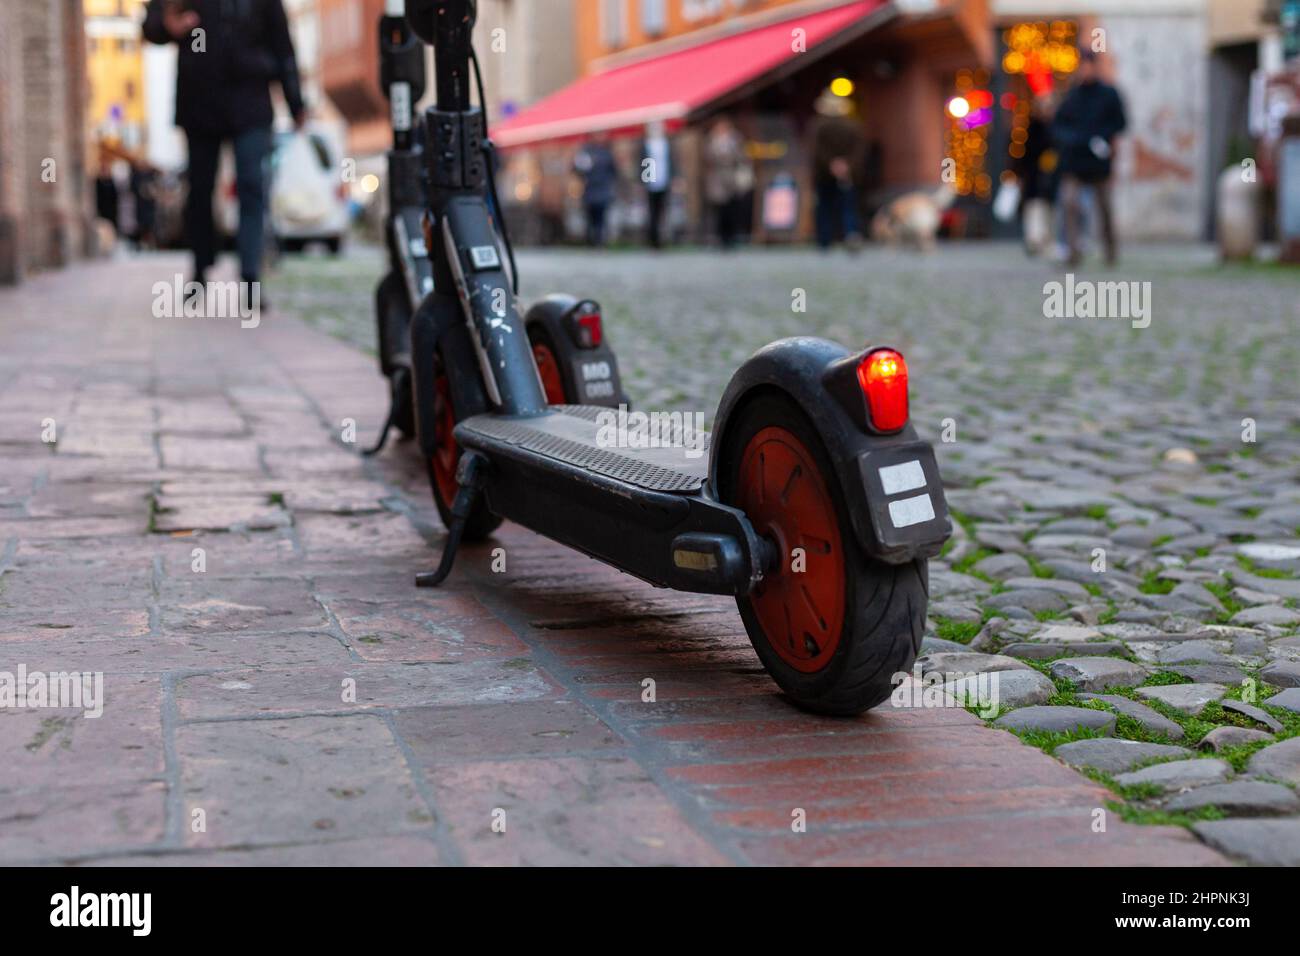 Two sharing electric scooters parked on a footpath in city center, Modena, Italy Stock Photo